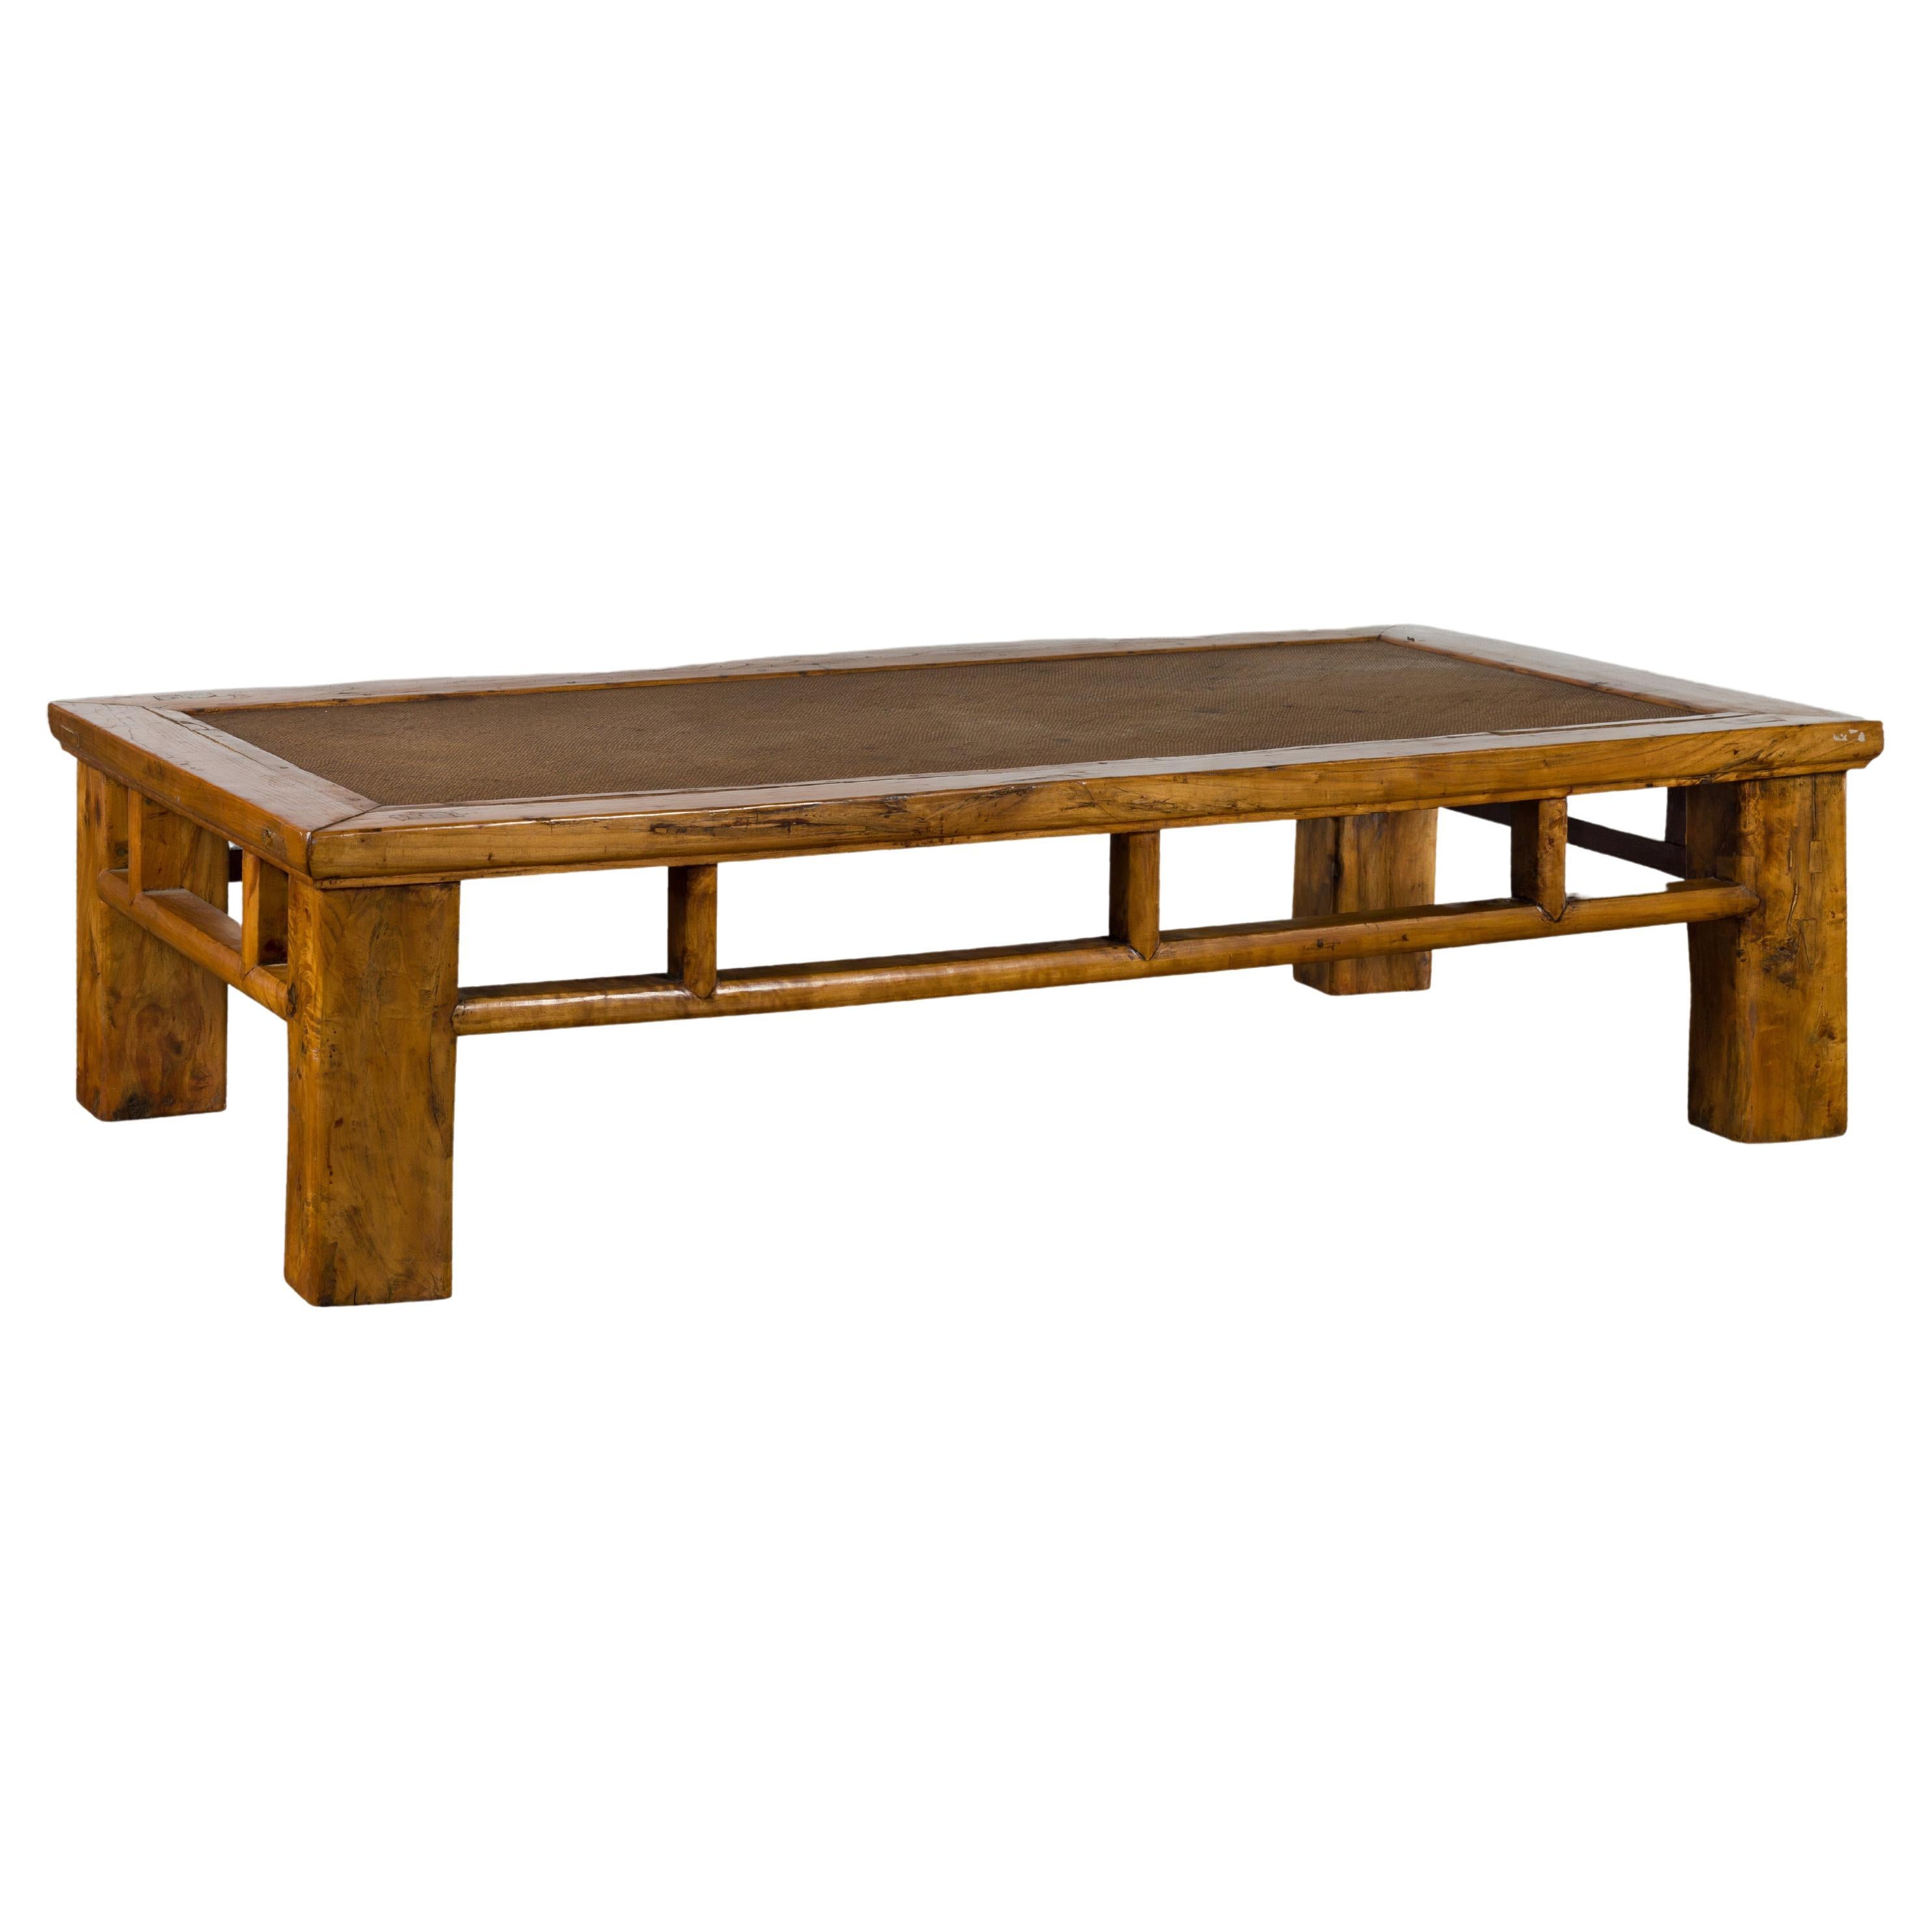 Chinese Qing Dynasty Elm Lohan Bed Coffee Table with Hand-Woven Rattan Top